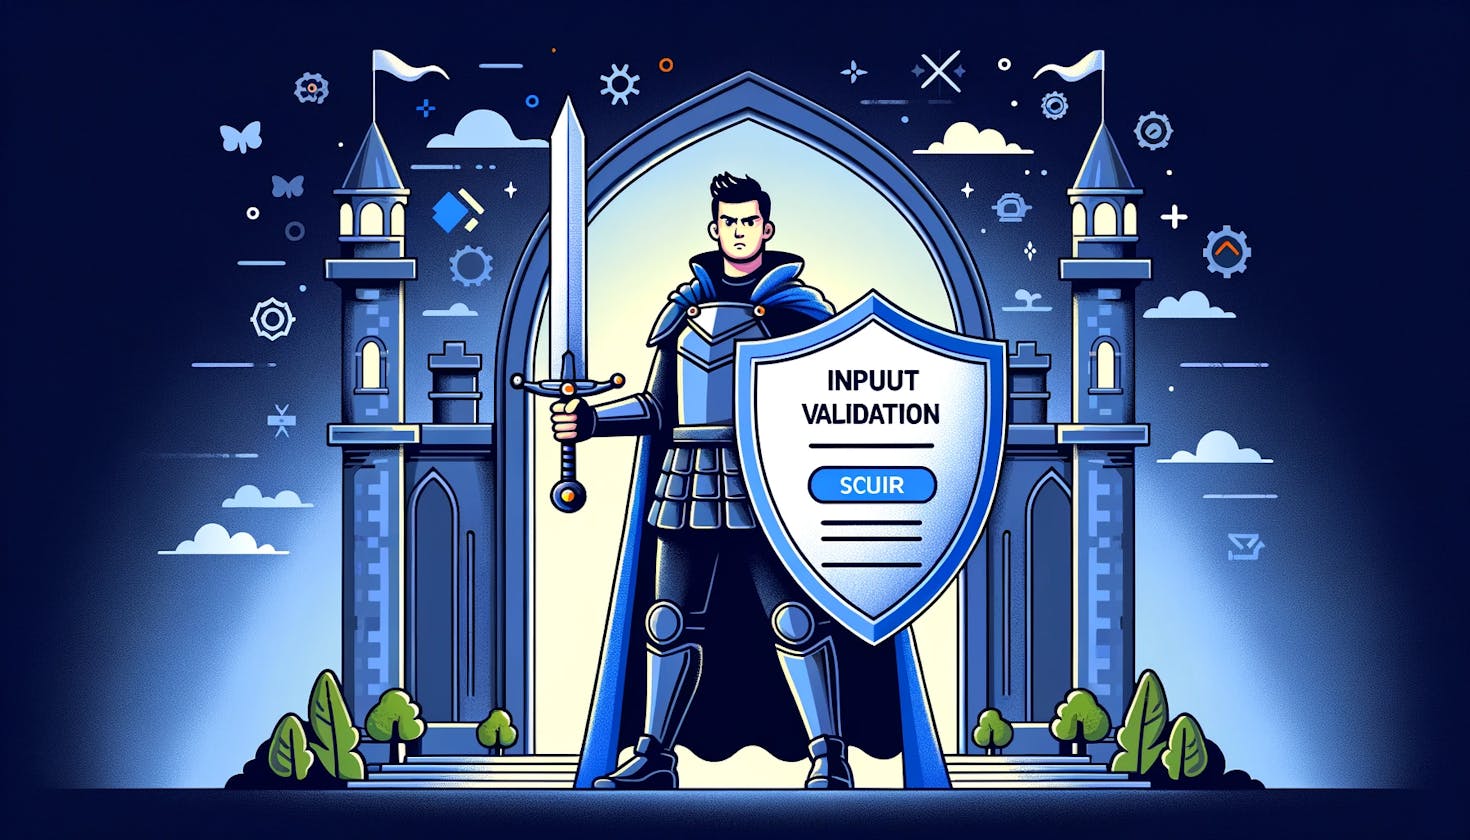 The Critical Role of Input Validation in Web Security